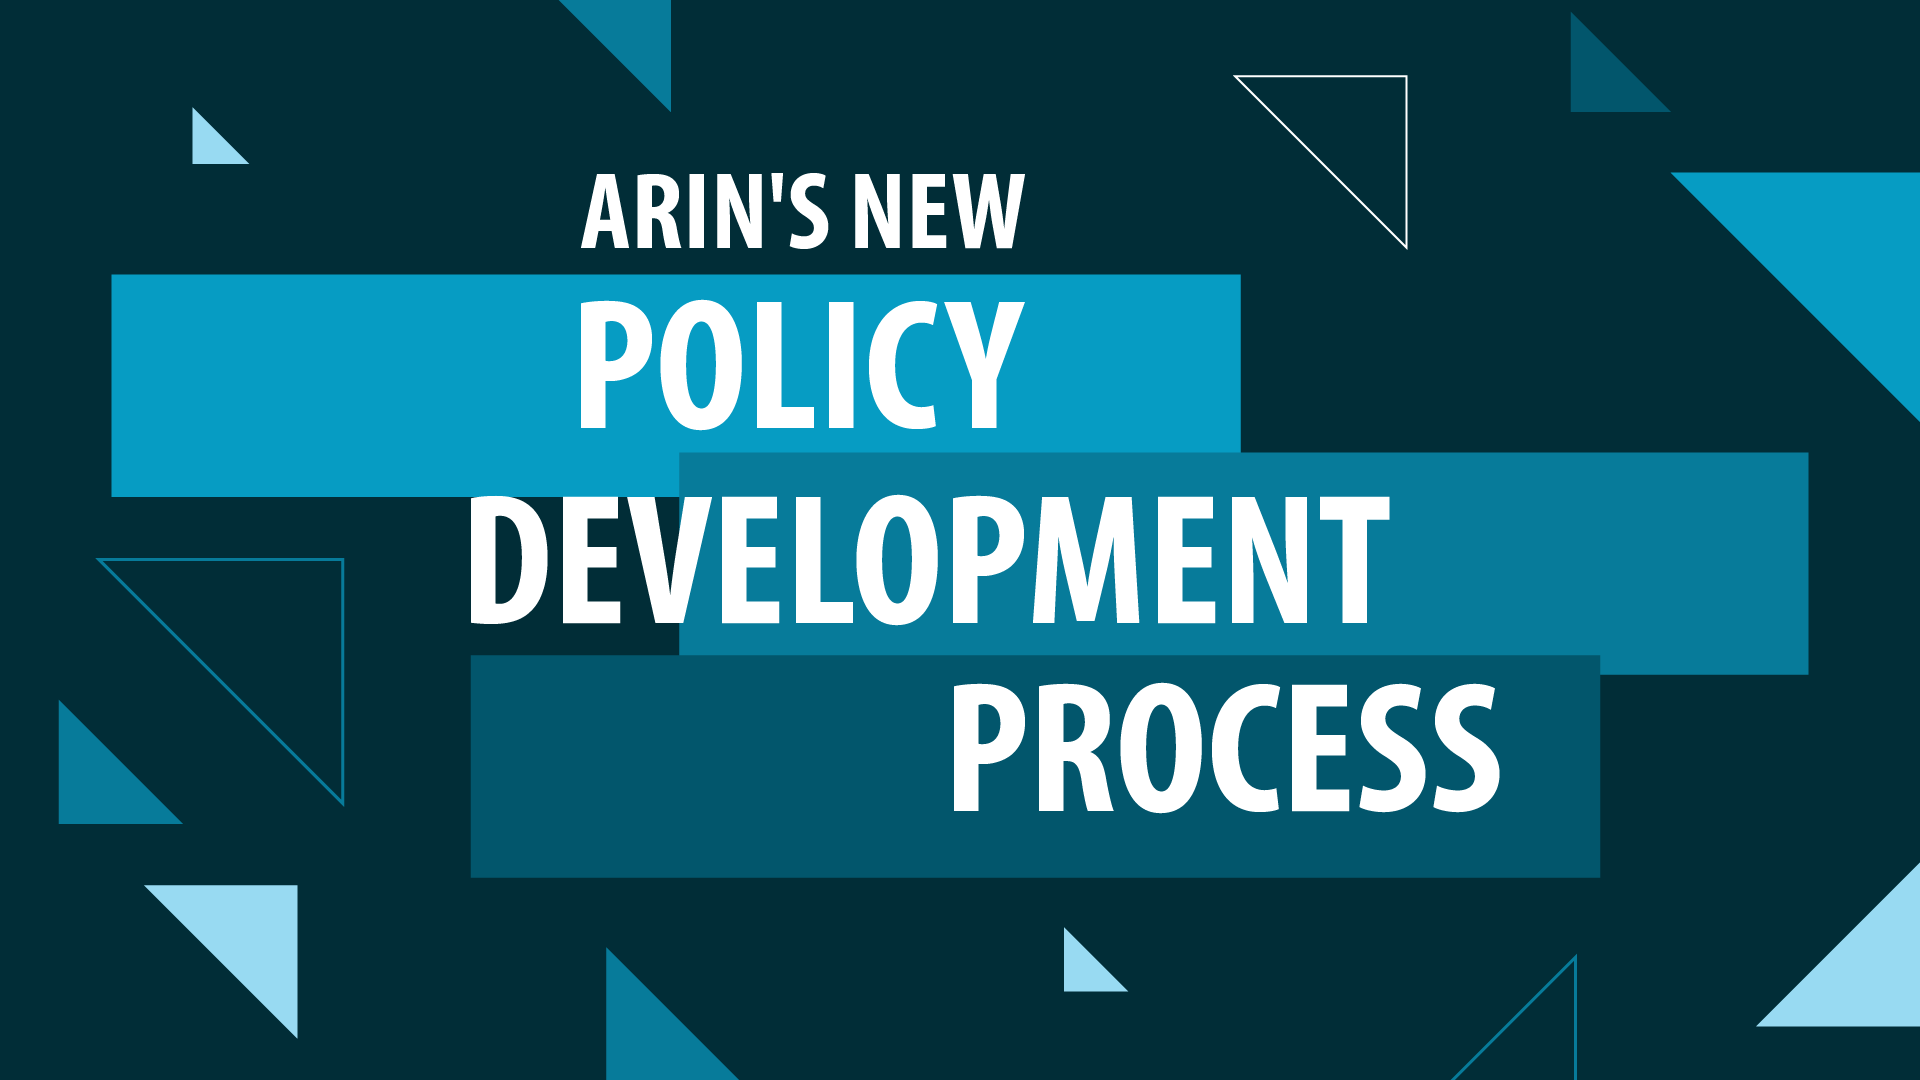 Meet Our New Policy Development Process